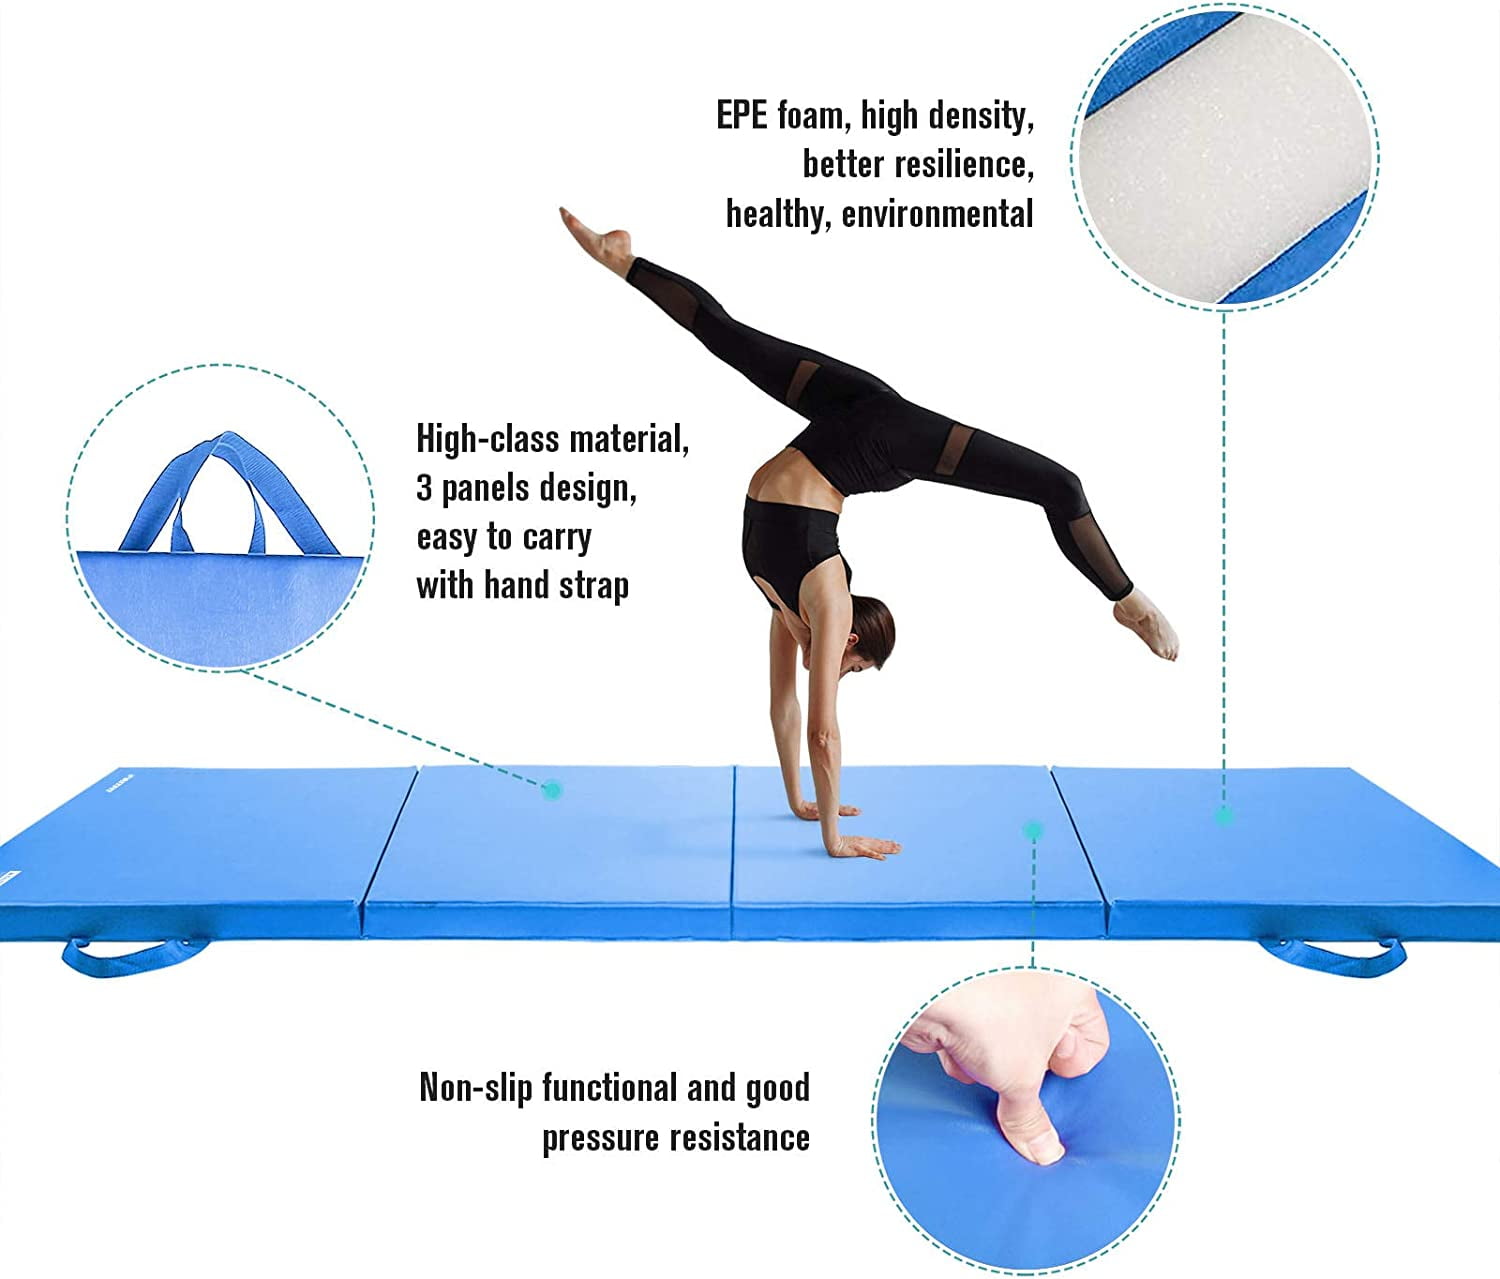 RitFit 3' x 6' Folding Gymnastics Mat with Carrying Handles for Yoga,  Stretching, Core Workouts(Black)